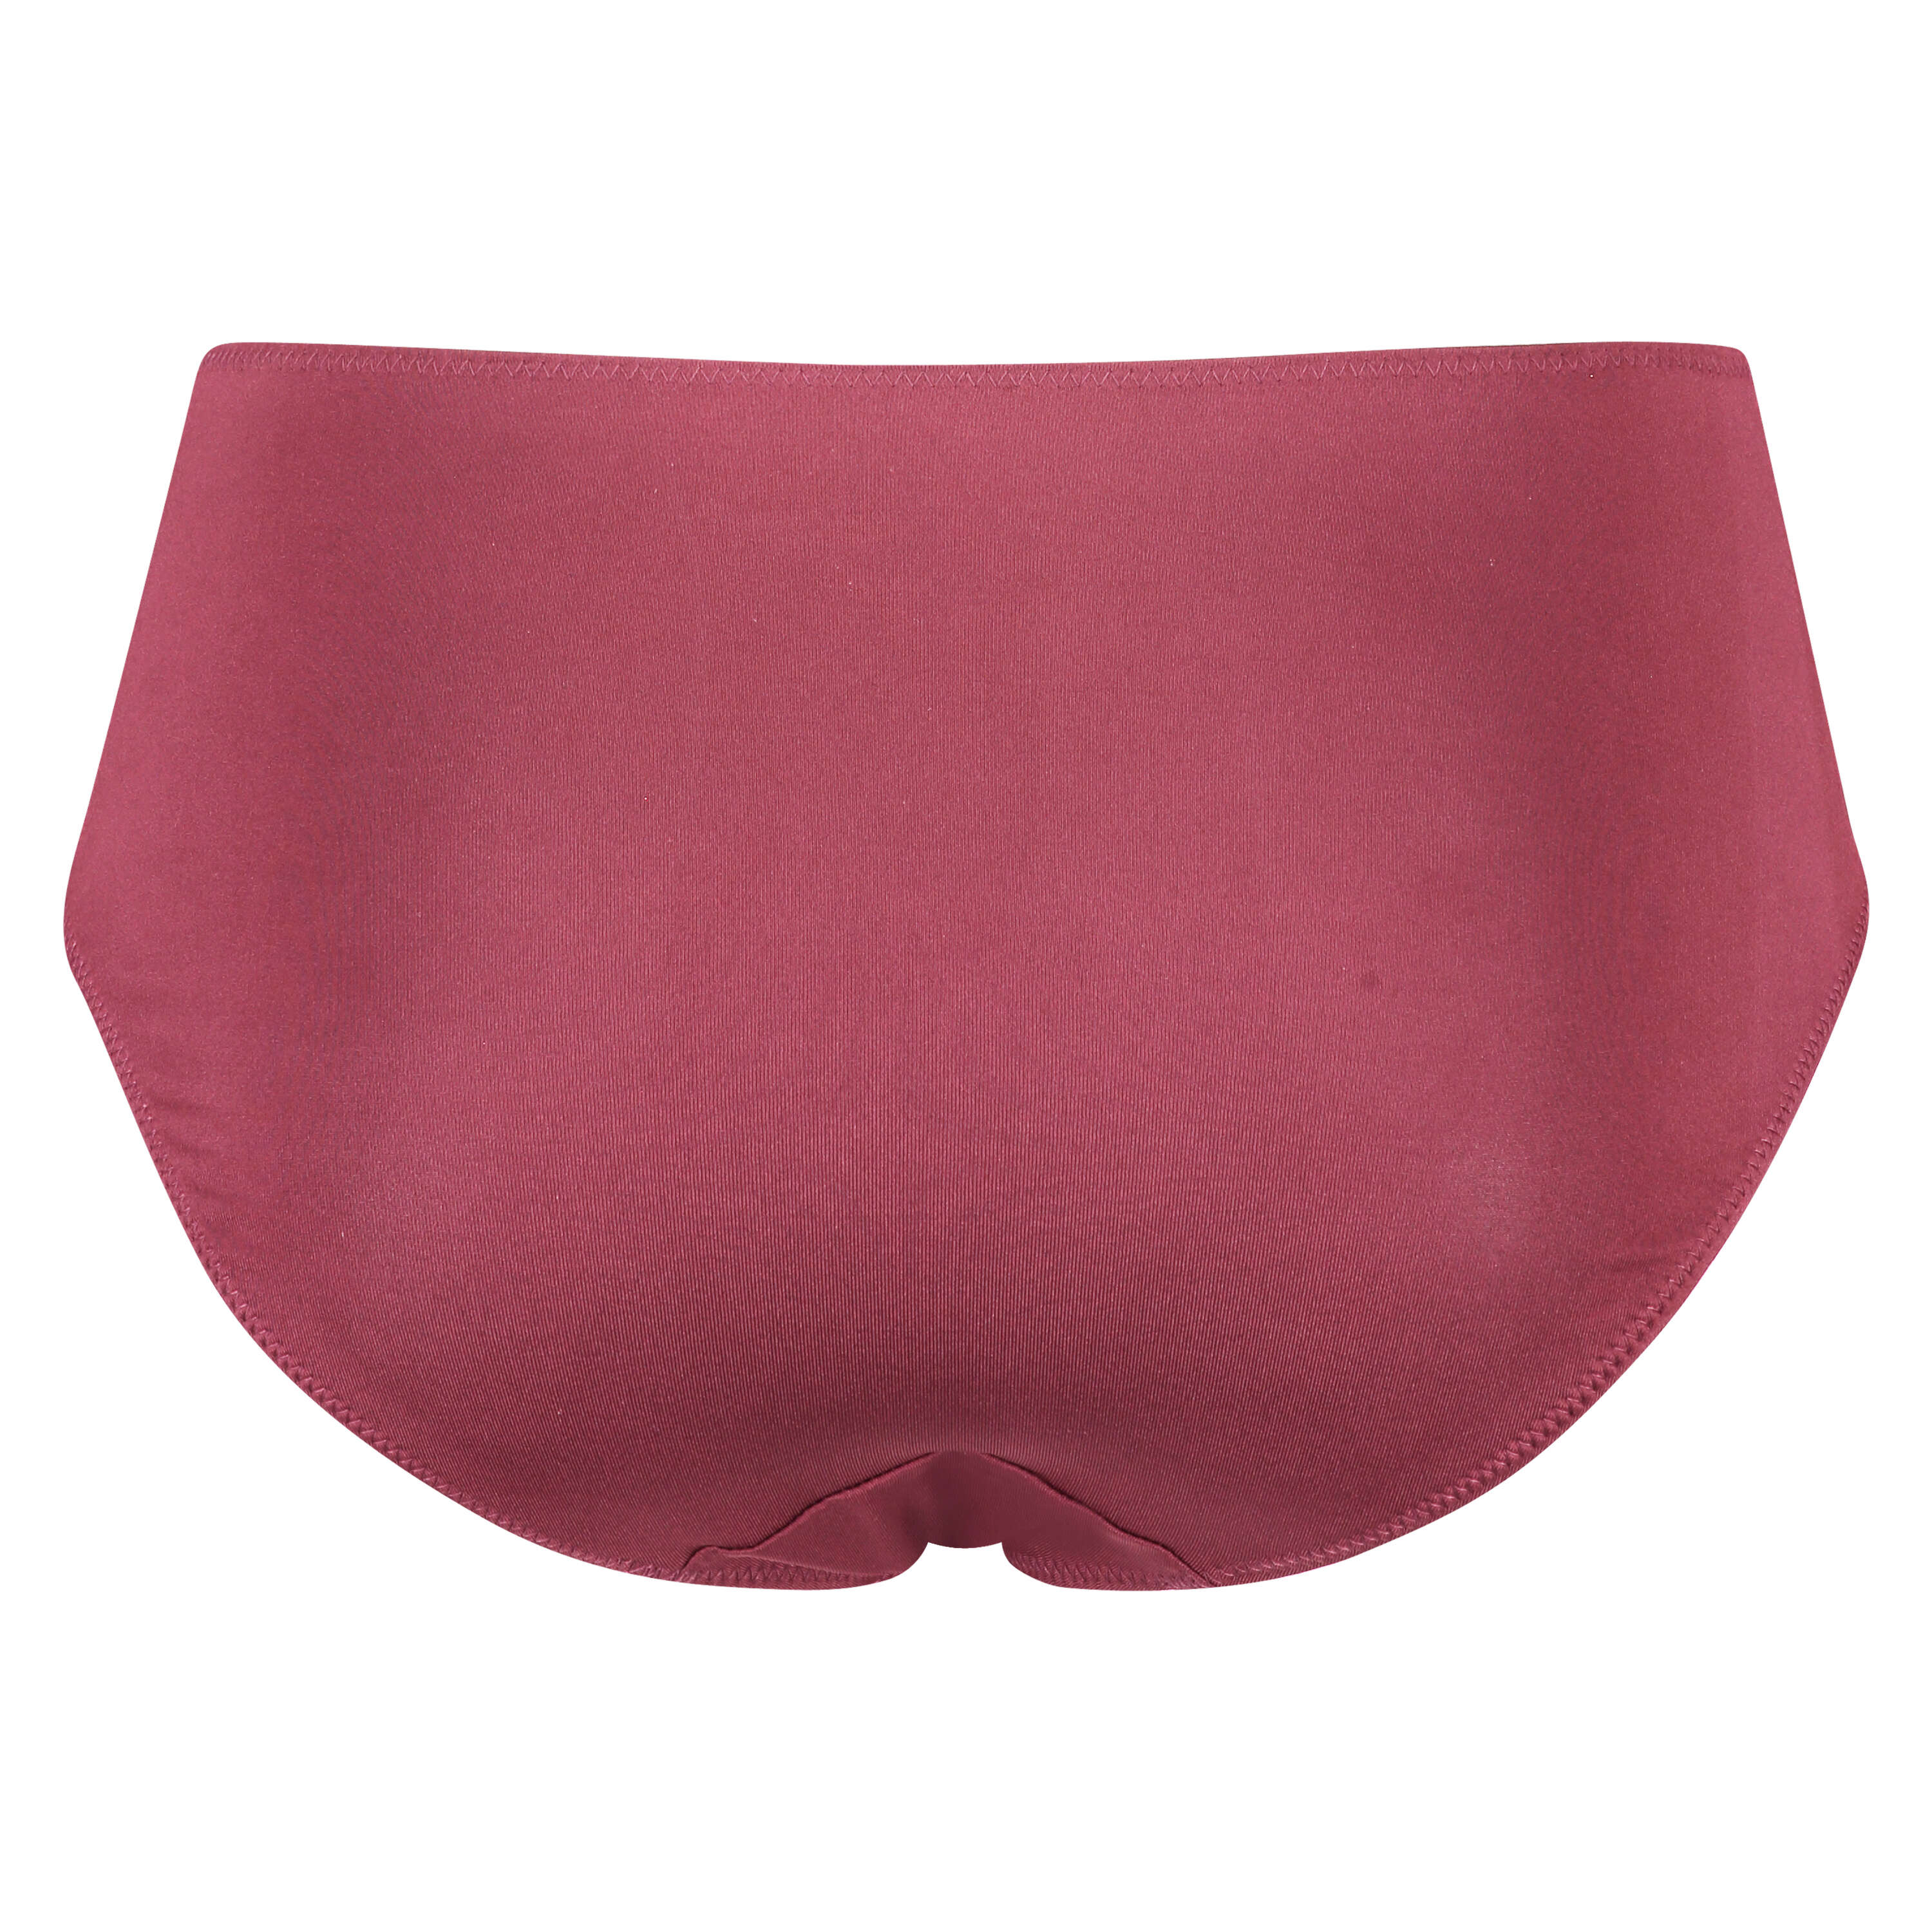 Sophie high knickers, Red, main